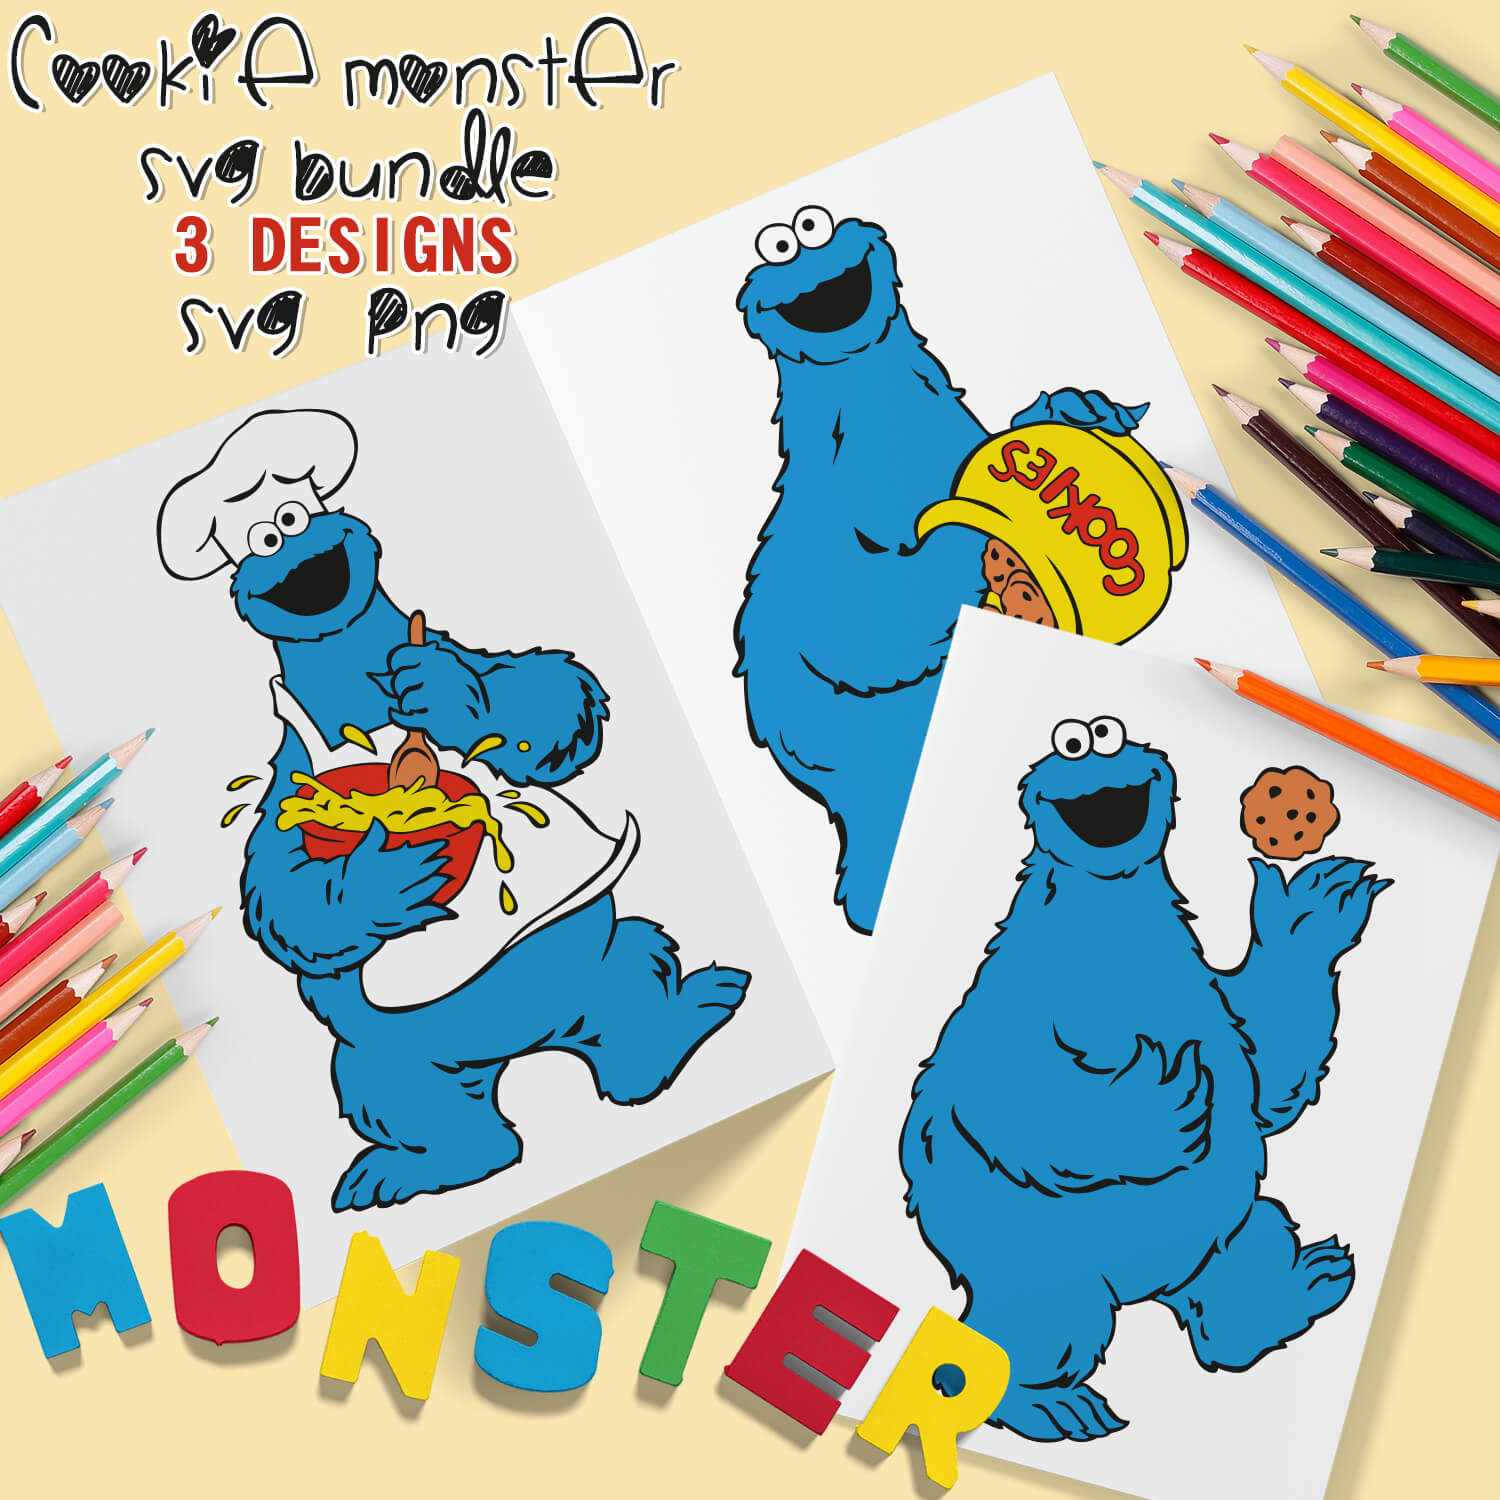 Sesame Street Coookie Monster - Are you making cookies? Design SVG